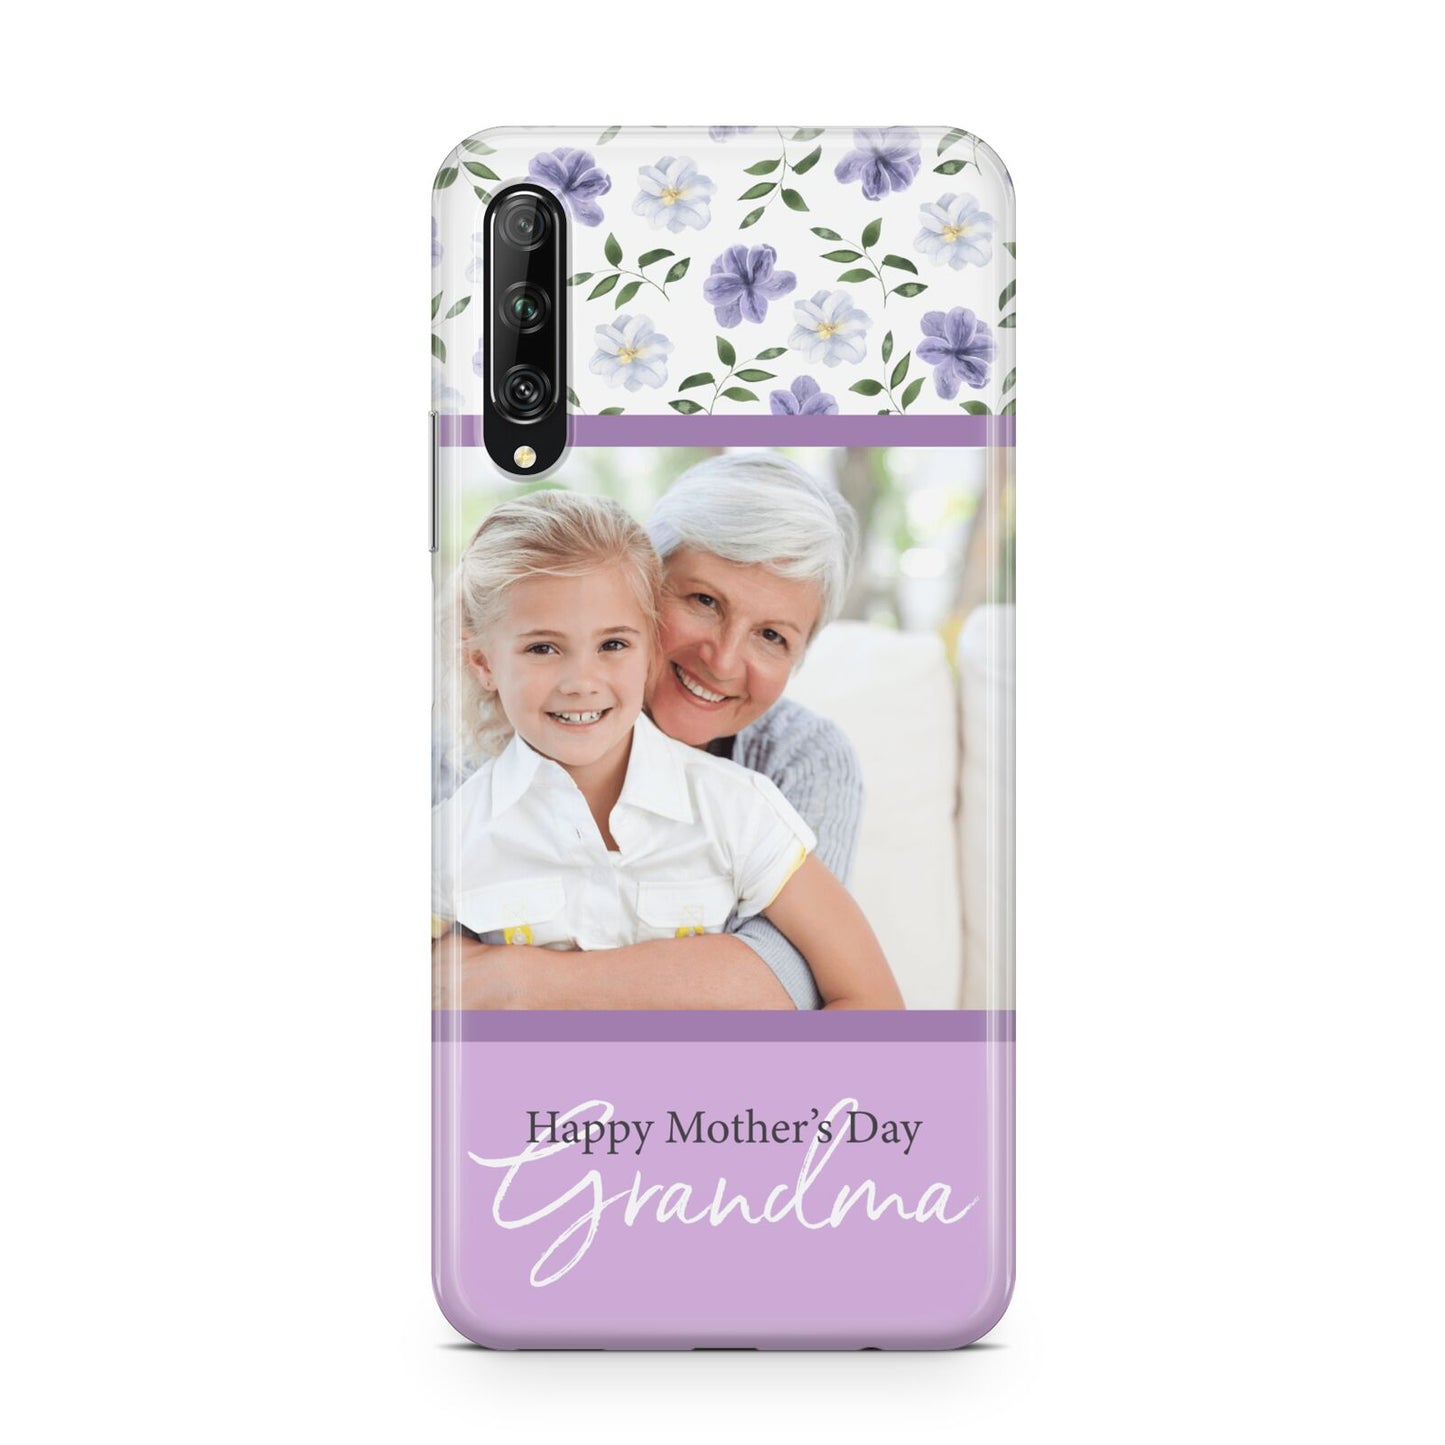 Personalised Grandma Mother s Day Huawei P Smart Pro 2019